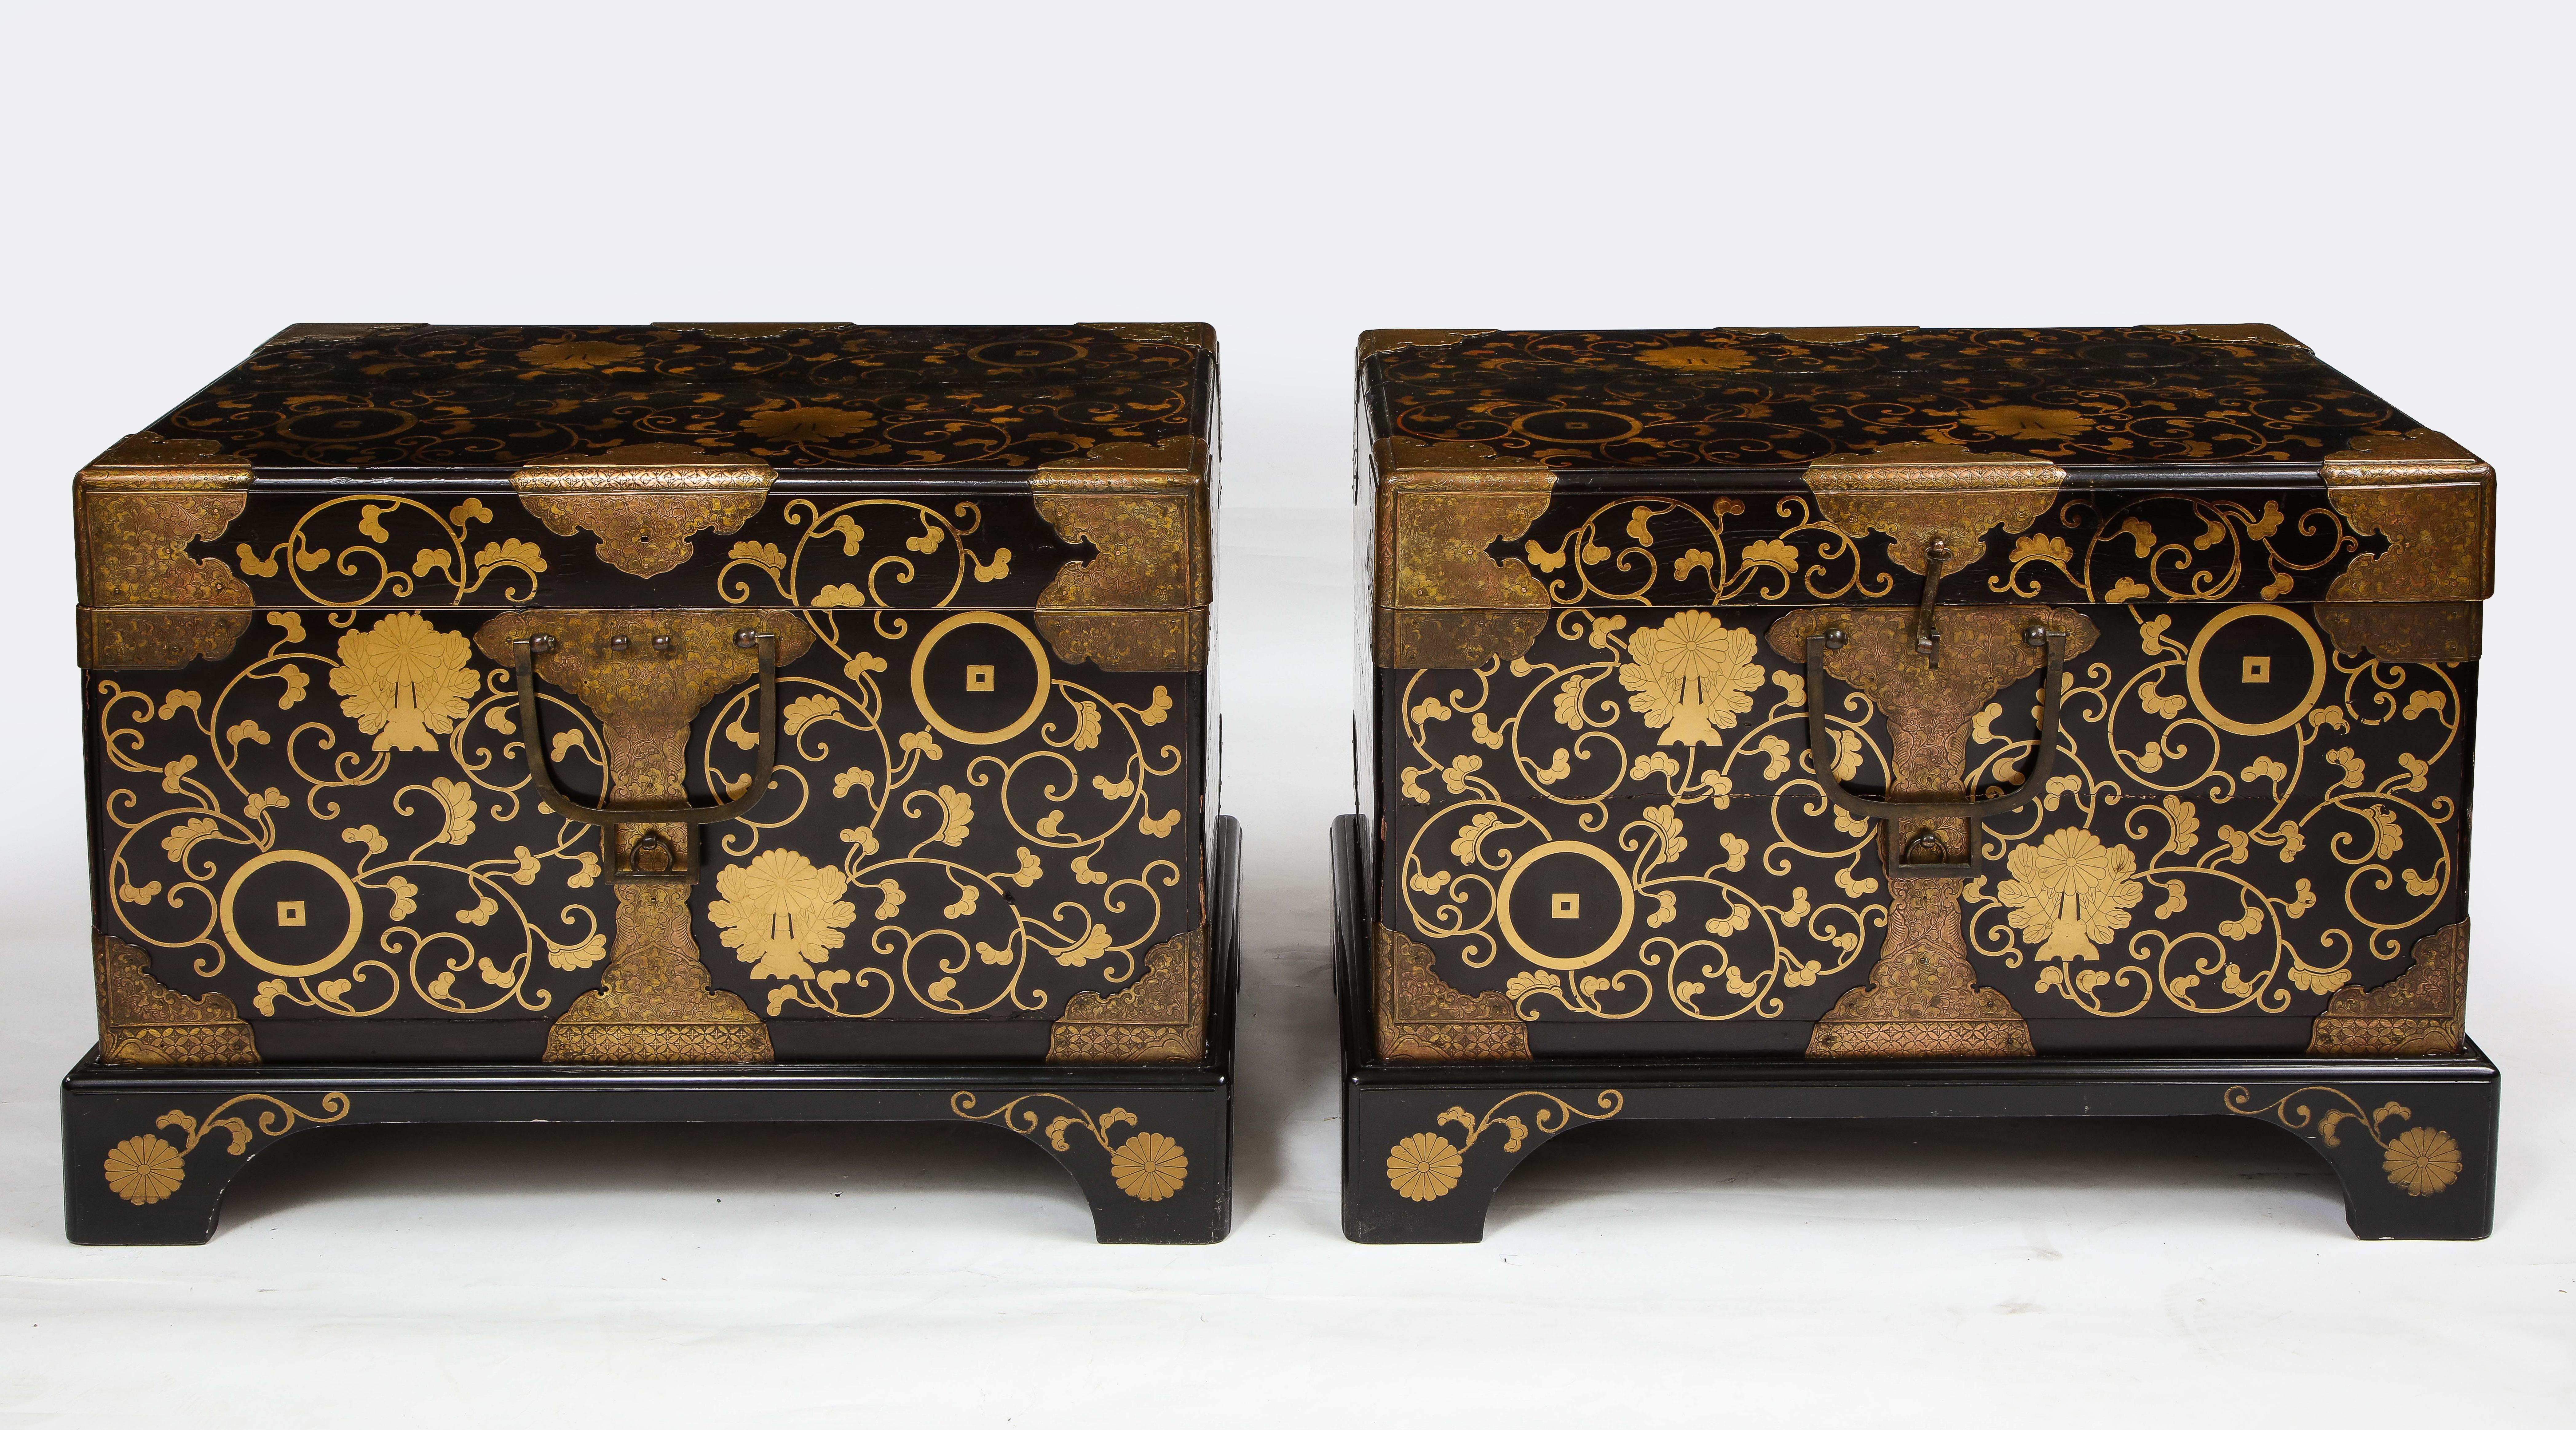 Gilt  Pair of 19th Century Japanese Meiji Period Dore Bronze Mounted Lacquered Chests For Sale